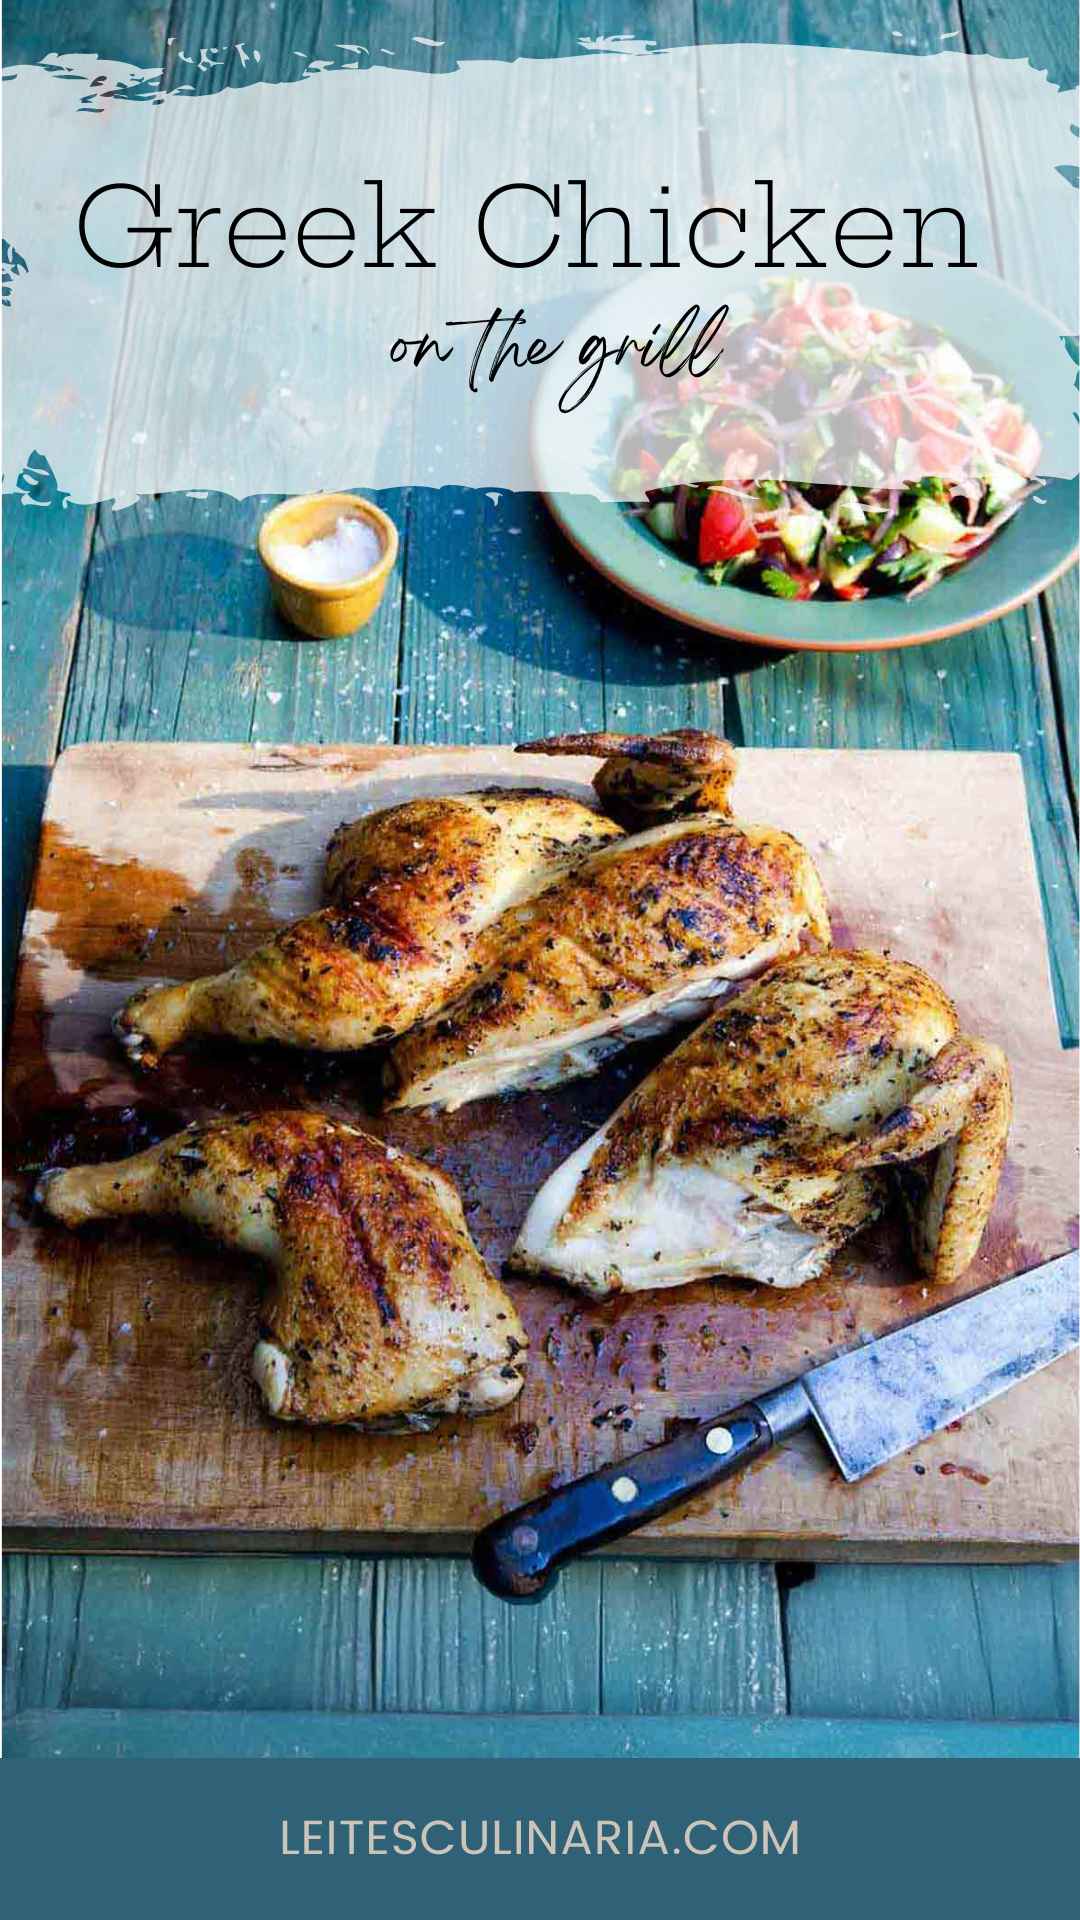 A partially carved grilled marinated chicken on a wooden board with a Greek salad nearby.